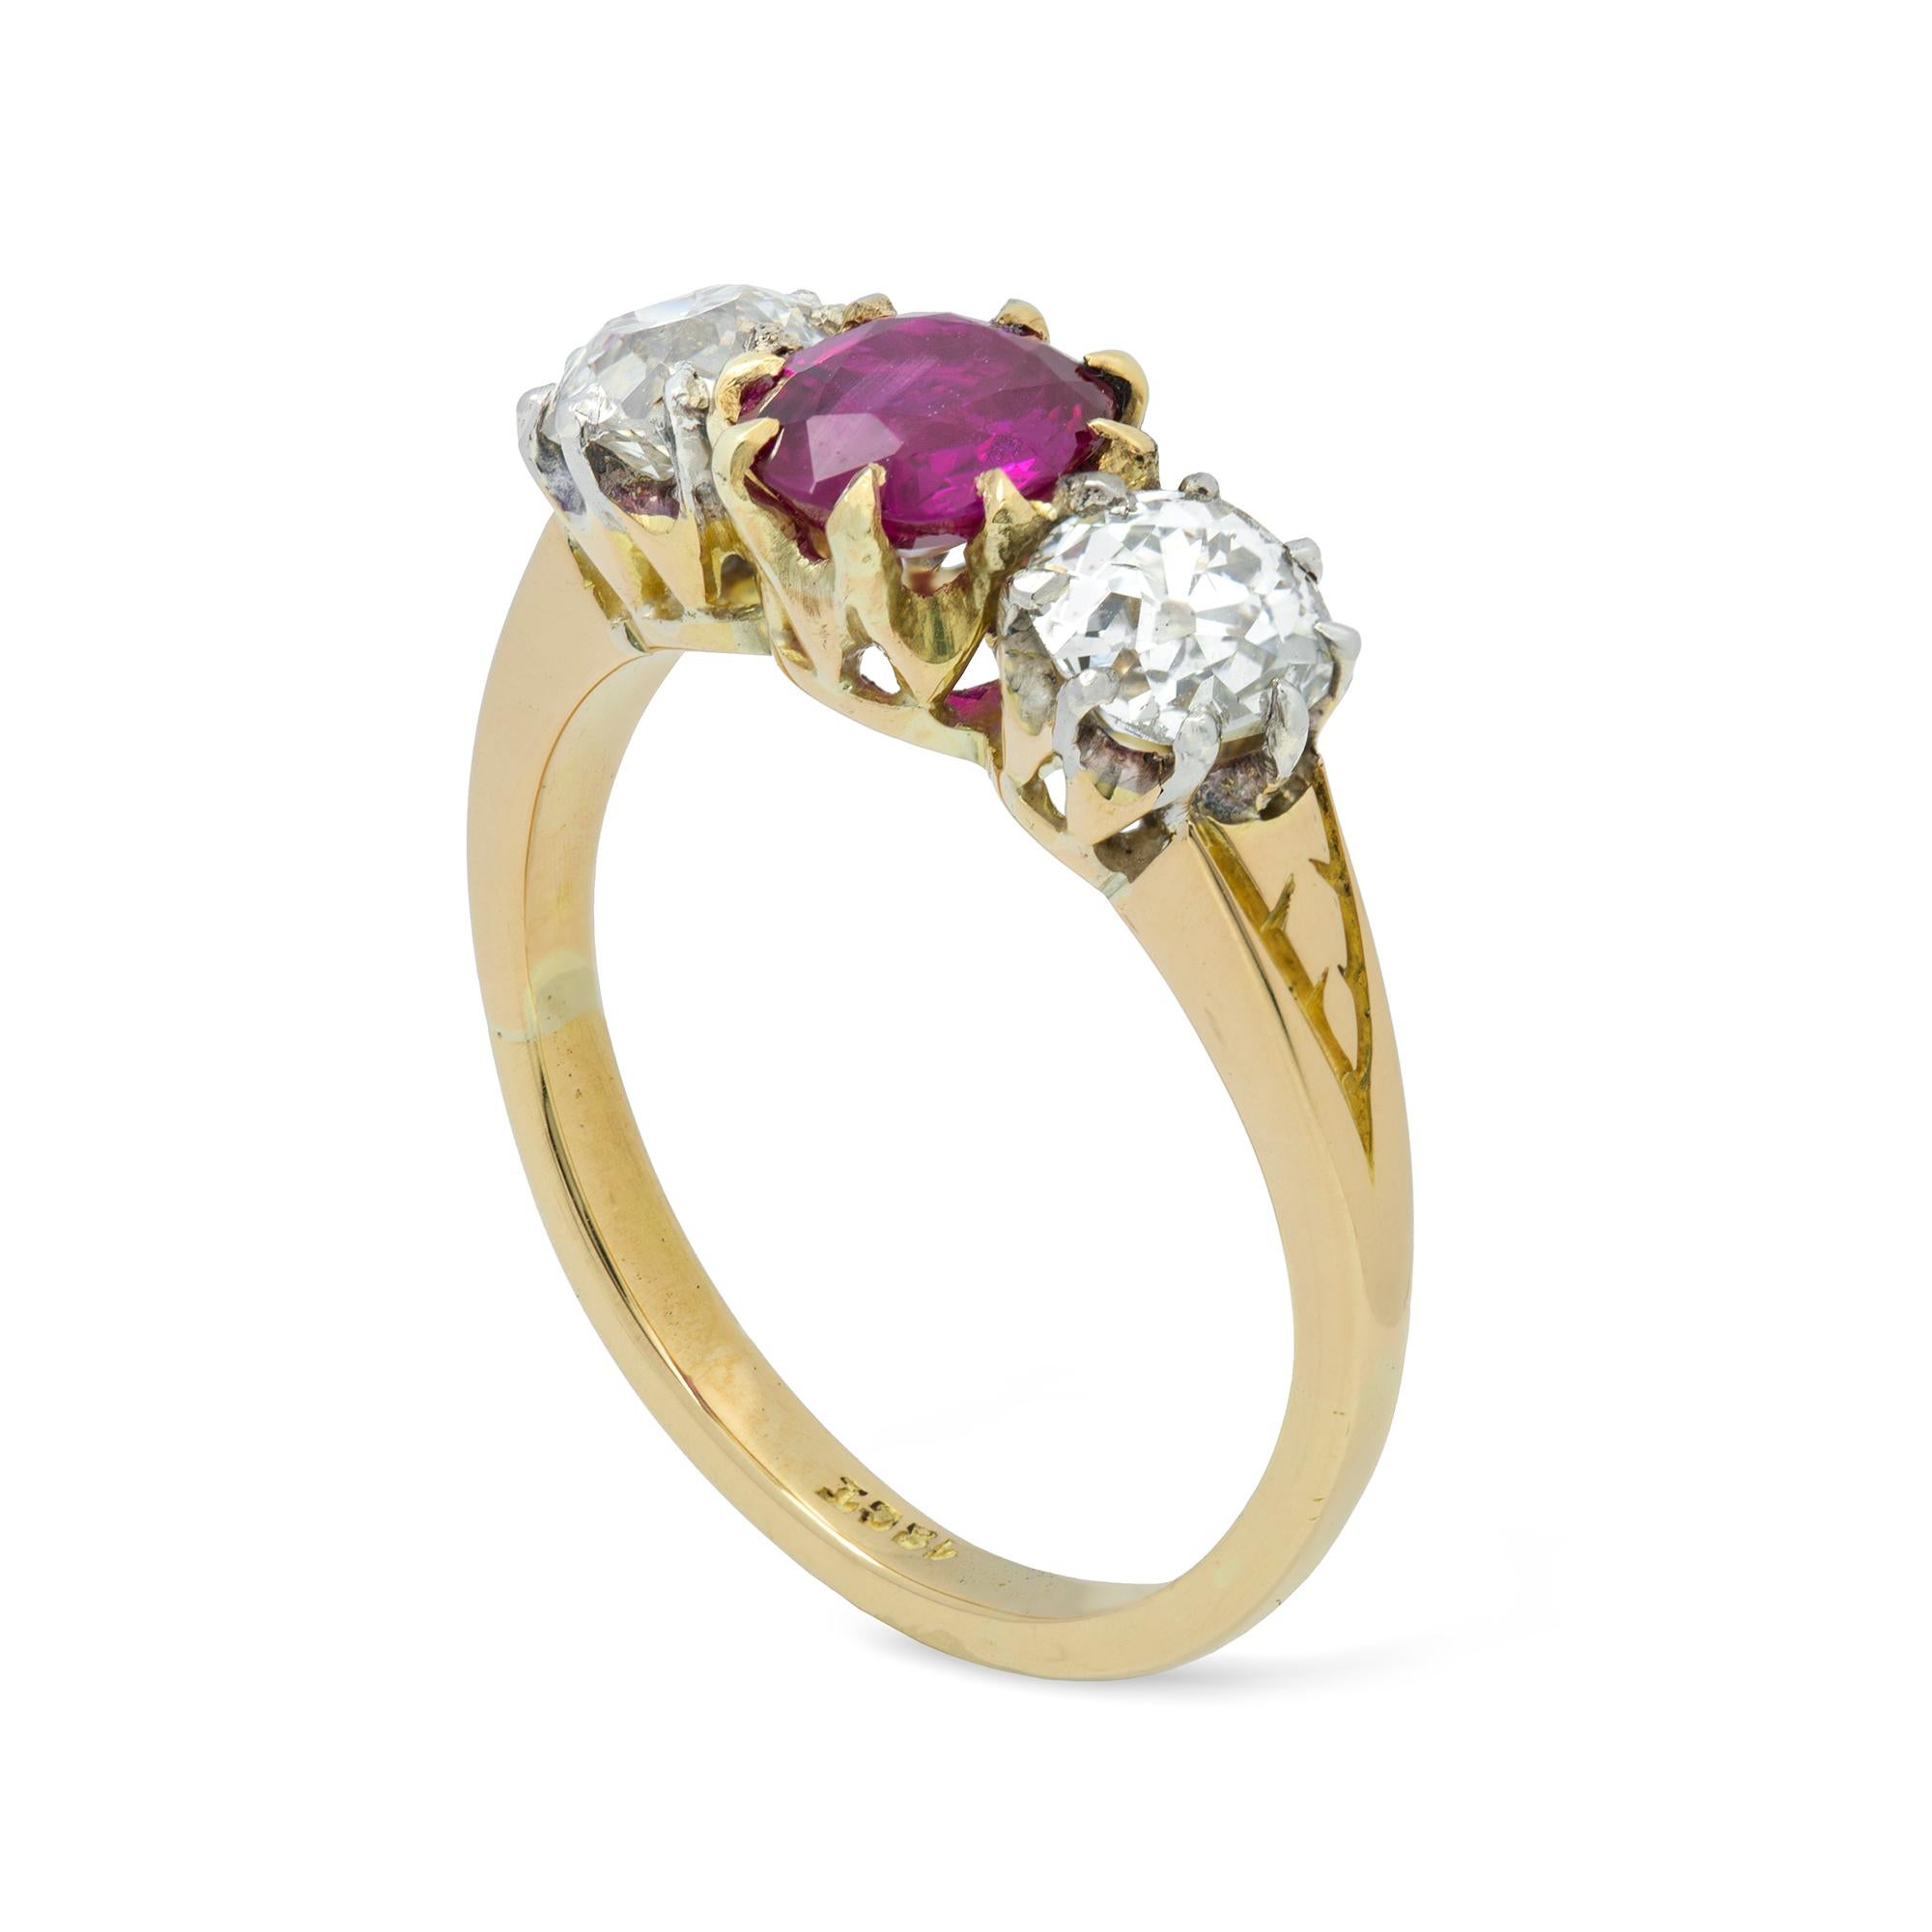 An Edwardian three stone ruby and diamond ring, the oval faceted ruby weighing 0.95 carats accompanied by GCS Report stating to be of Burmese origin with no indication of heat treatment, set between two old brilliant-cut diamonds weighing